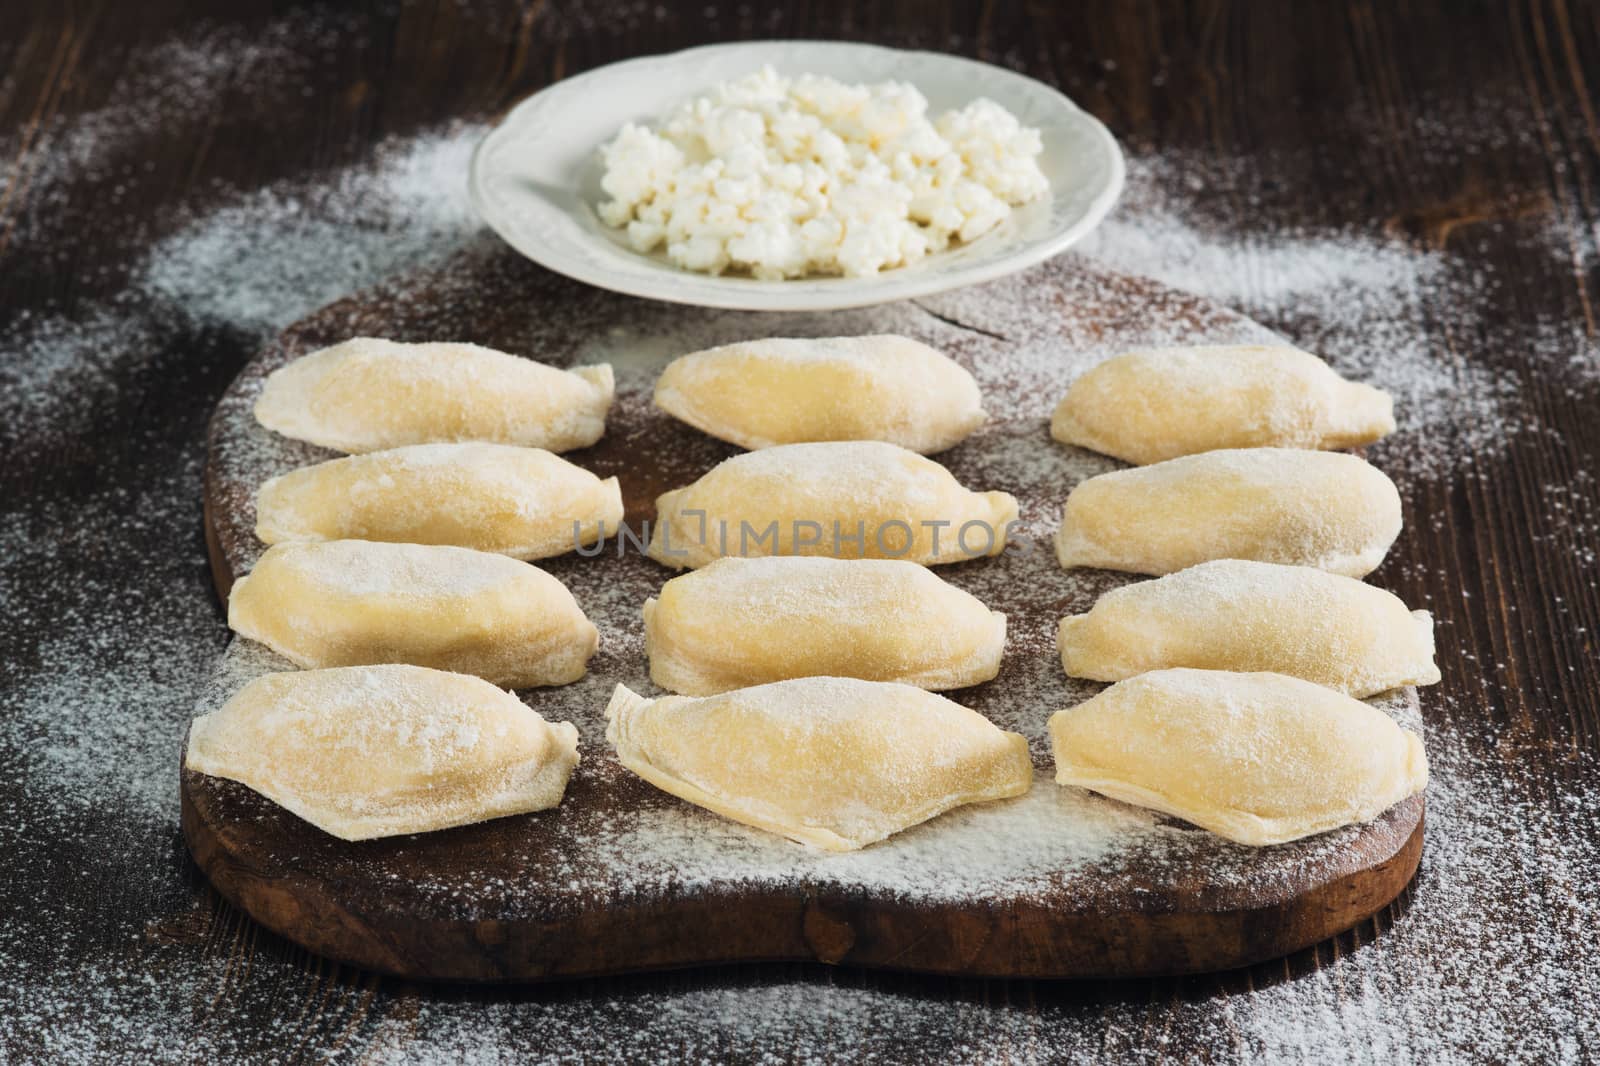 Lots raw dumplings with cottage cheese  by kzen